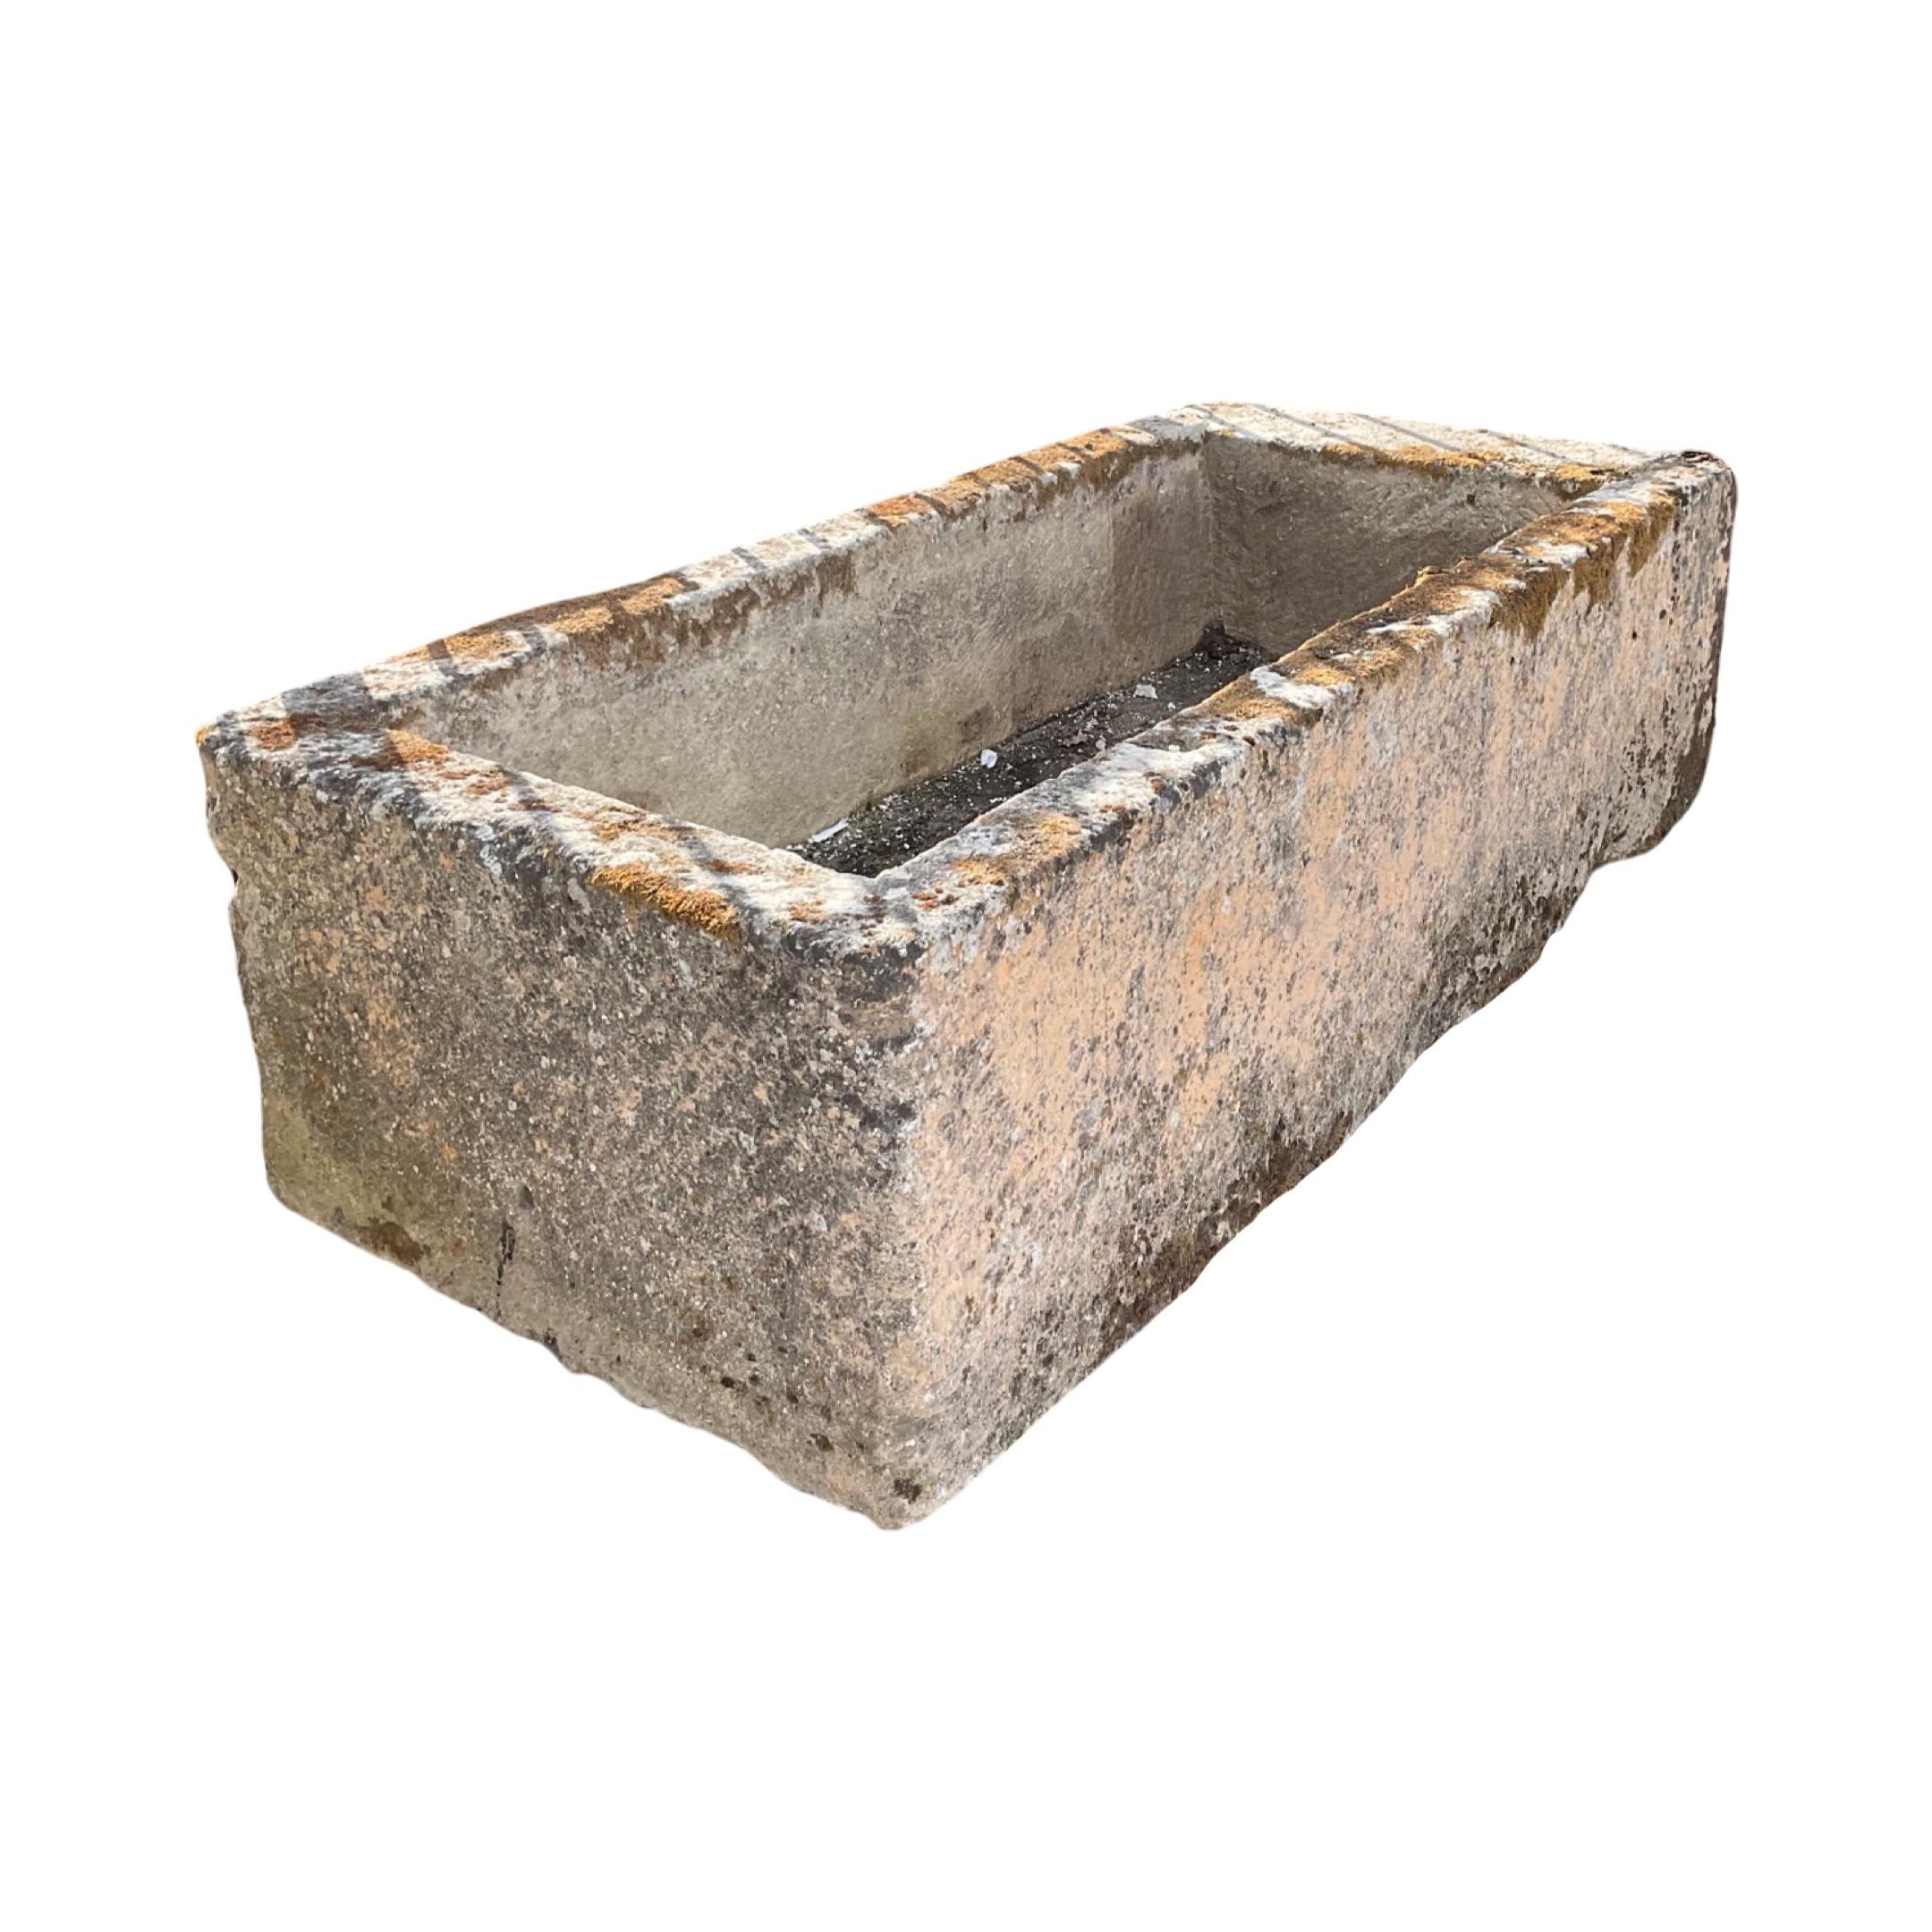 This French Limestone Trough is an authentic antique from the 17th century. Its construction of strong limestone is sure to last, making it a timeless and durable piece. Perfect for adding a classic touch to any garden or interior.